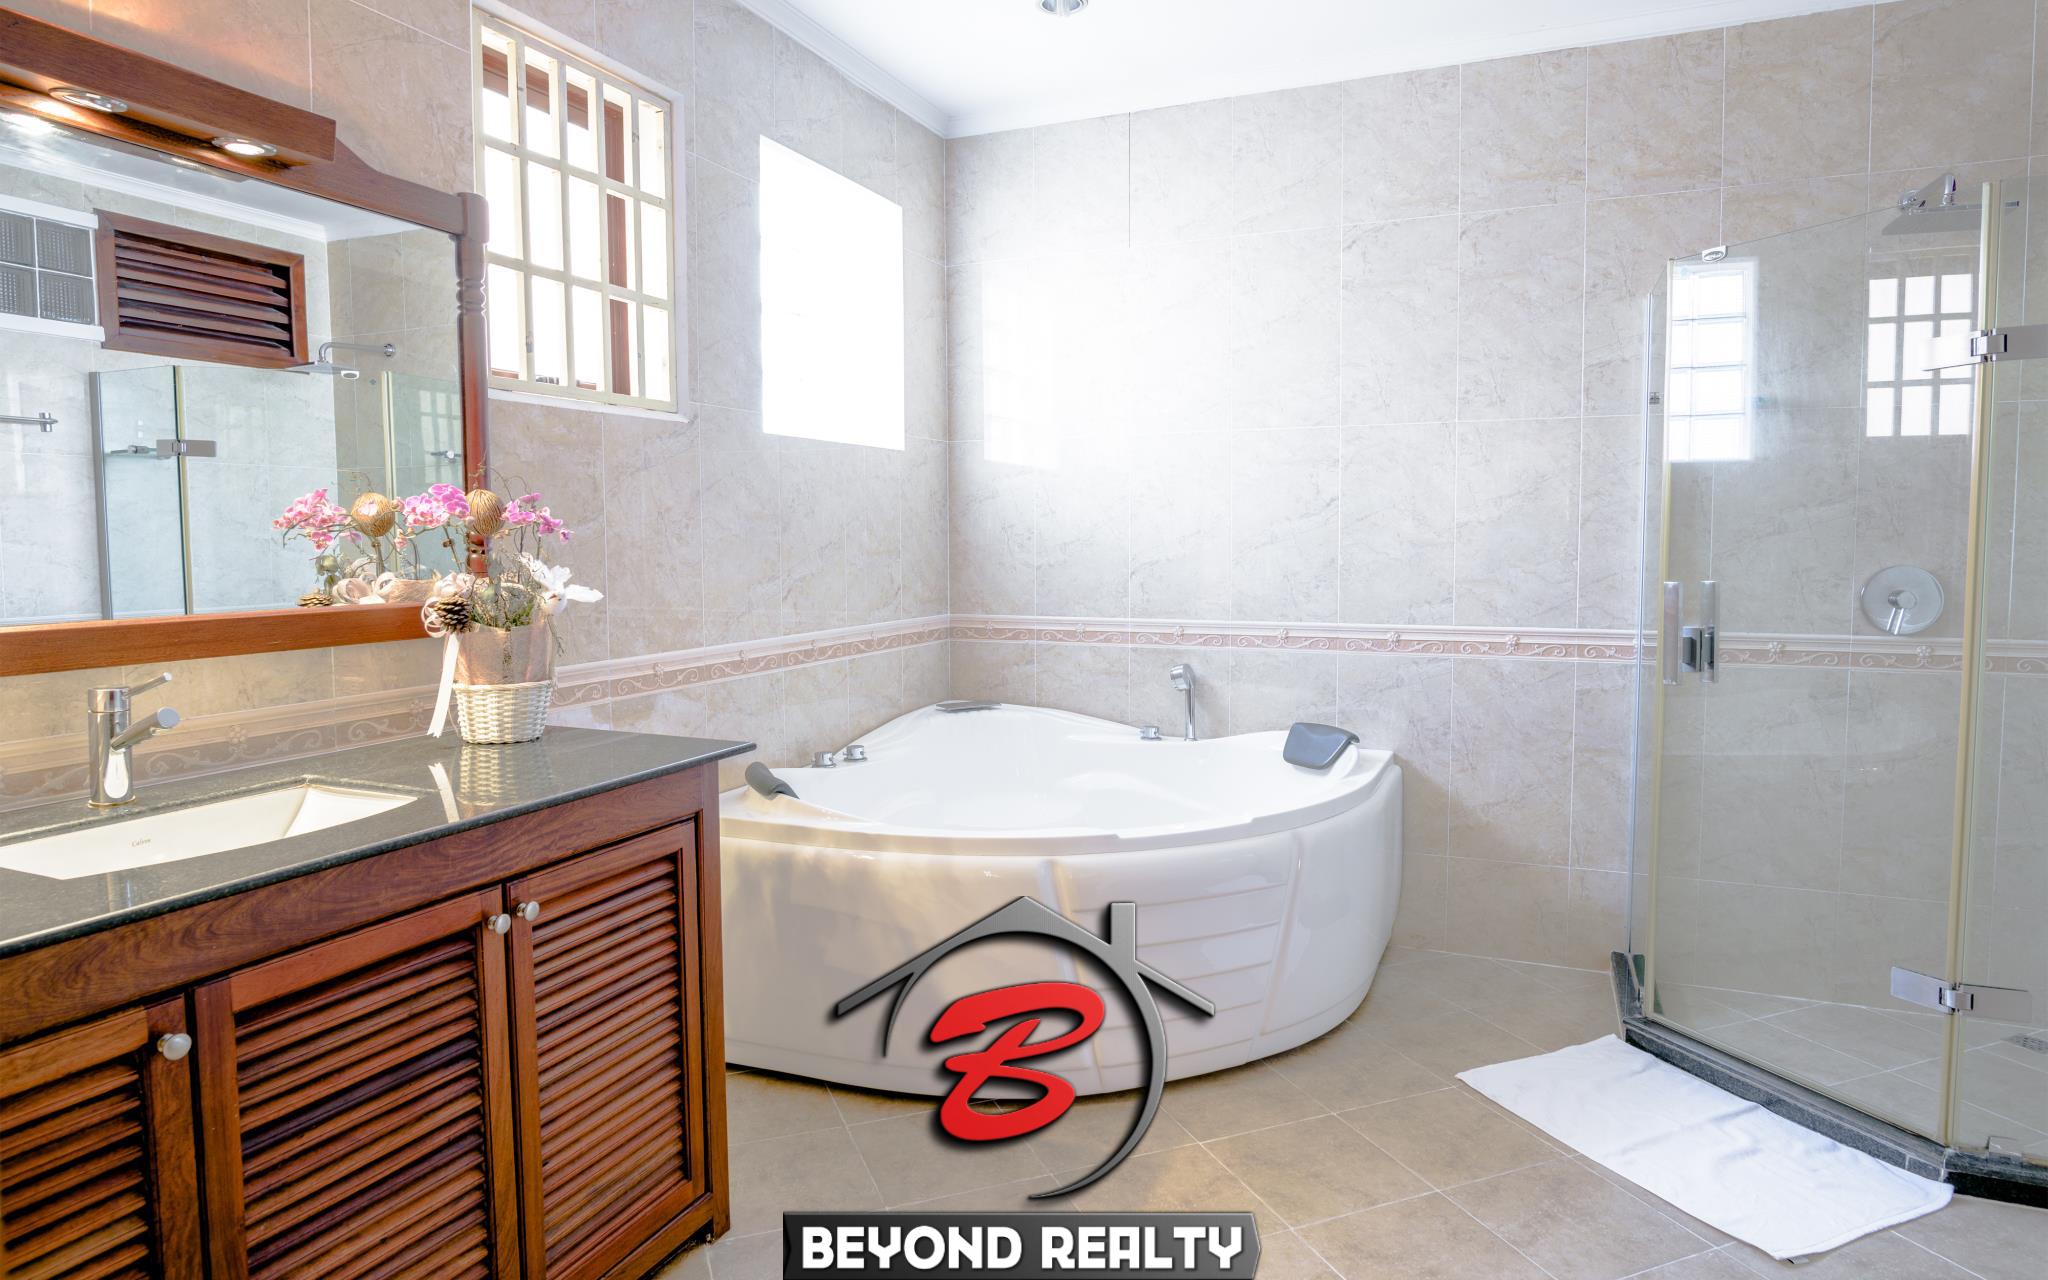 a bathroom of the 1-bedroom luxury serviced apartment for rent in BKK1 Phnom Penh Cambodia